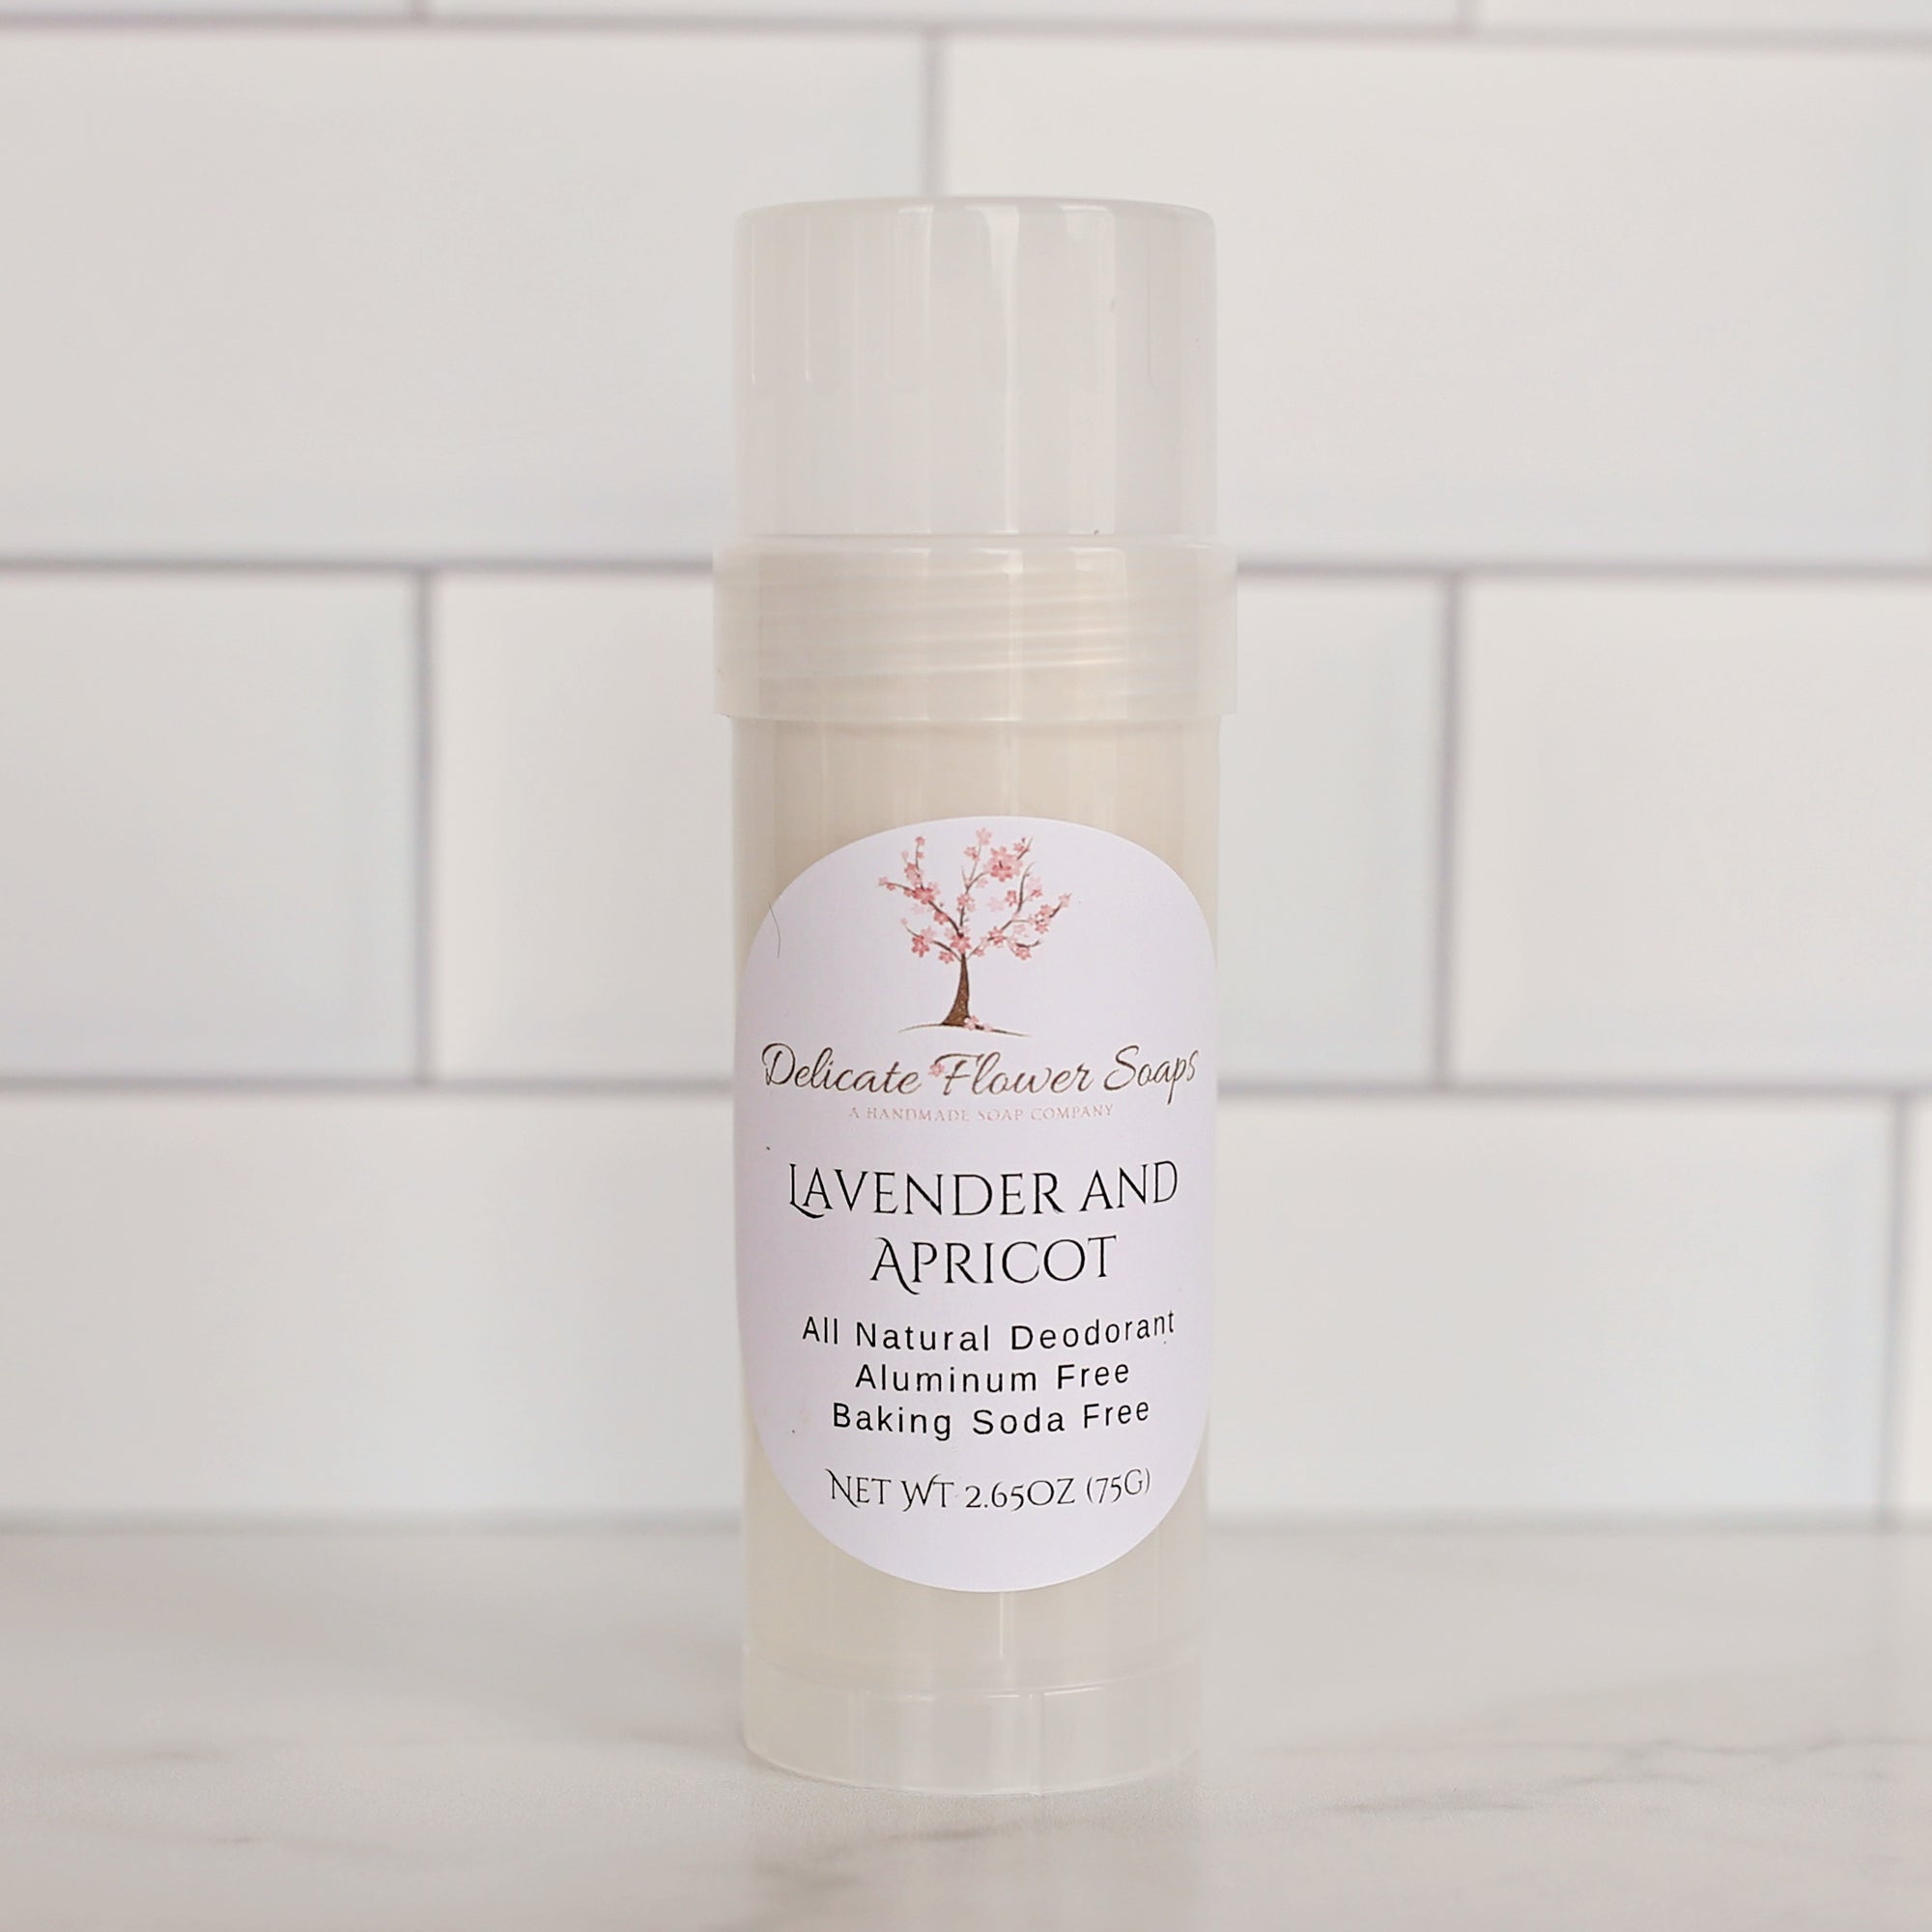 Lavender and Apricot Solid Deodorant